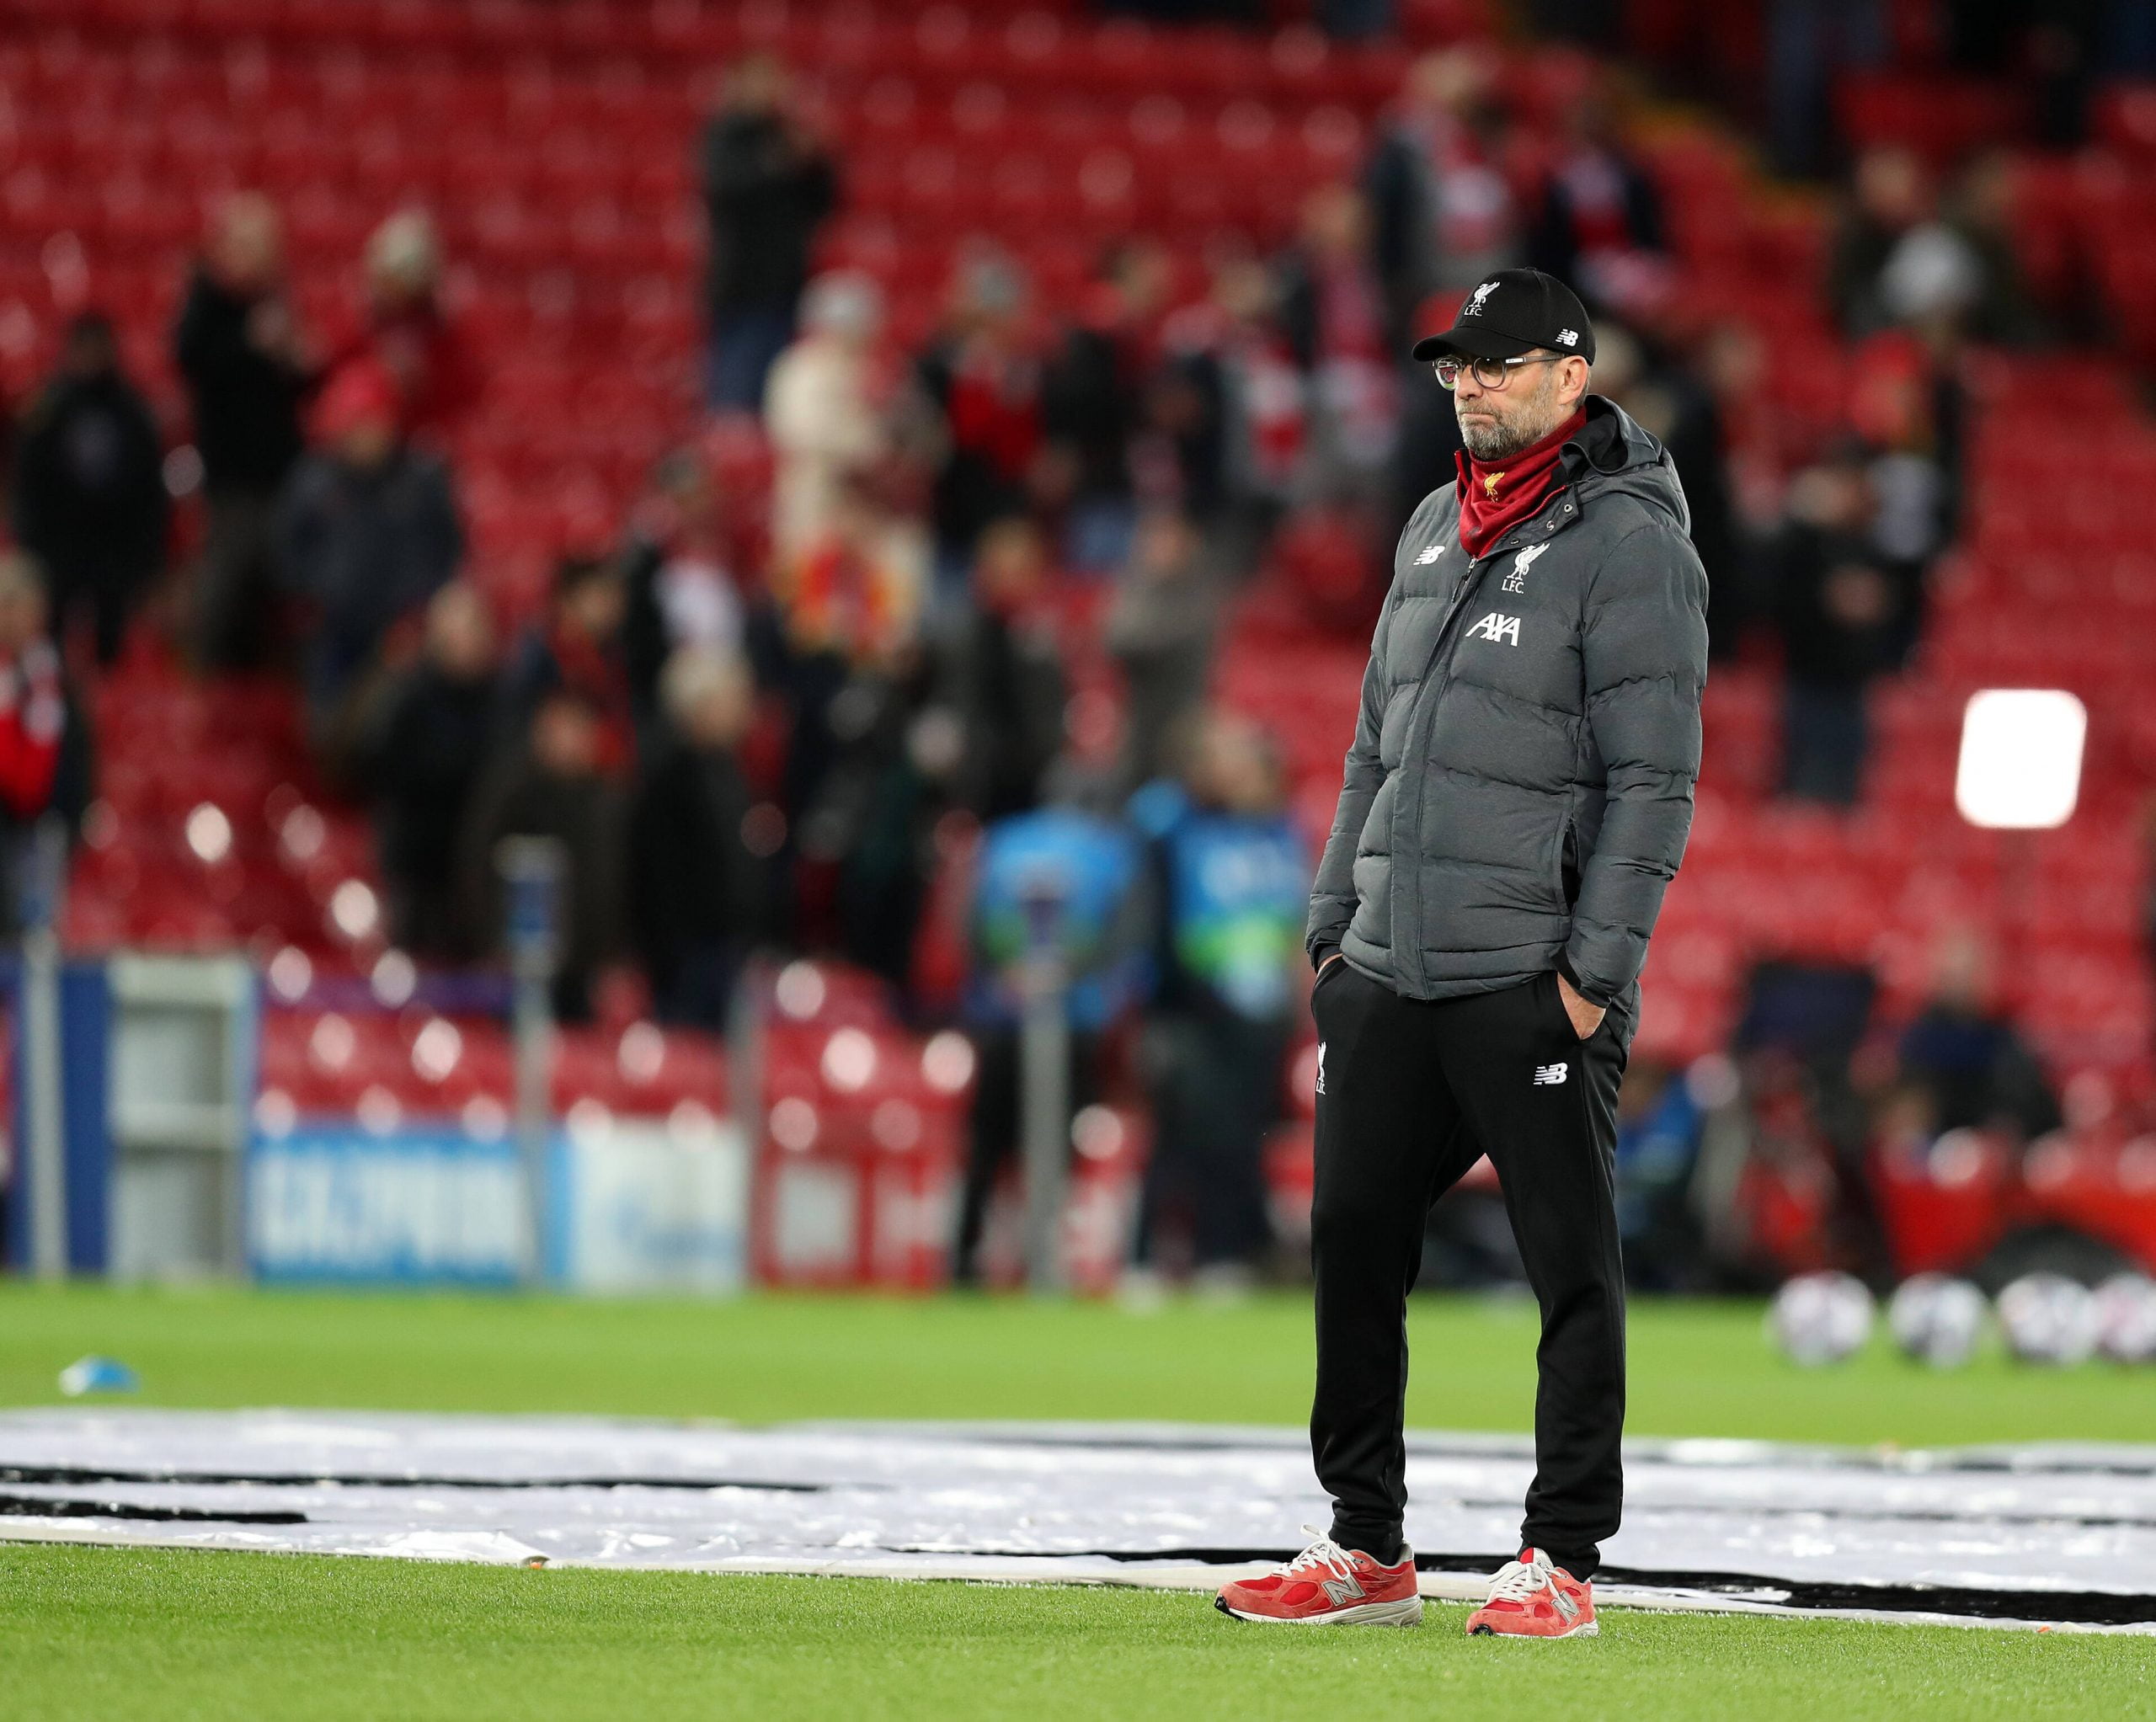 11th March 2020 Anfield, Liverpool, Merseyside, England UEFA Champions League, Liverpool versus Atletico Madrid Liverpool manager Jurgen Klopp looks on during the warm up PUBLICATIONxNOTxINxUK ActionPlus12216875 DavidxBlunsden